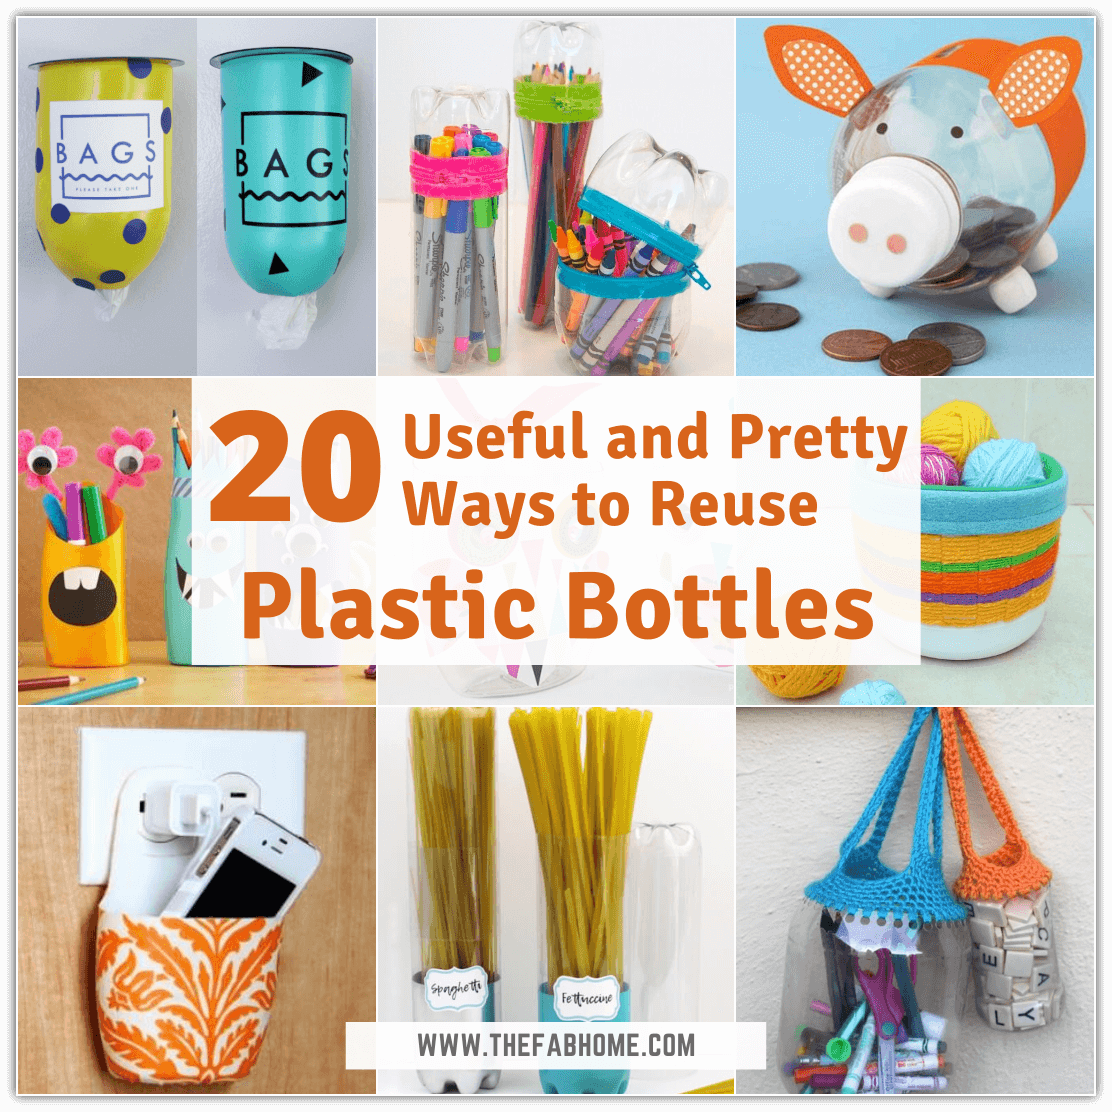 With all the plastic we use, we're sure to have some bottles lying around. Utilize them smartly with these 20 Ways to Reuse Plastic Bottles for the Home.